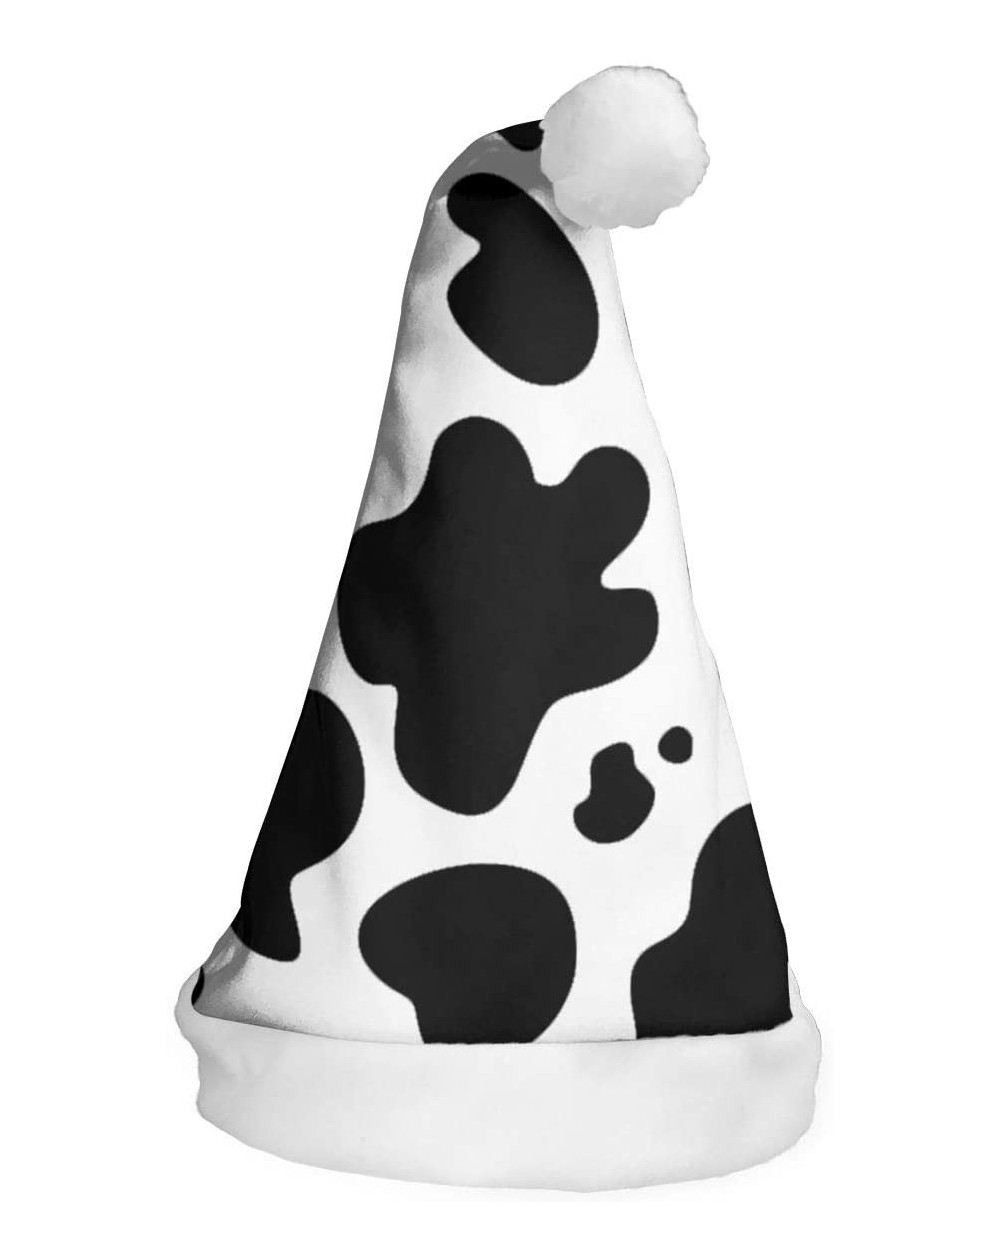 Hats Cow Print Christmas Hats Santa Hat Naughty Festive Holiday Hat Xmas Costume for Adults Kids Celebrations - White - CD18L...